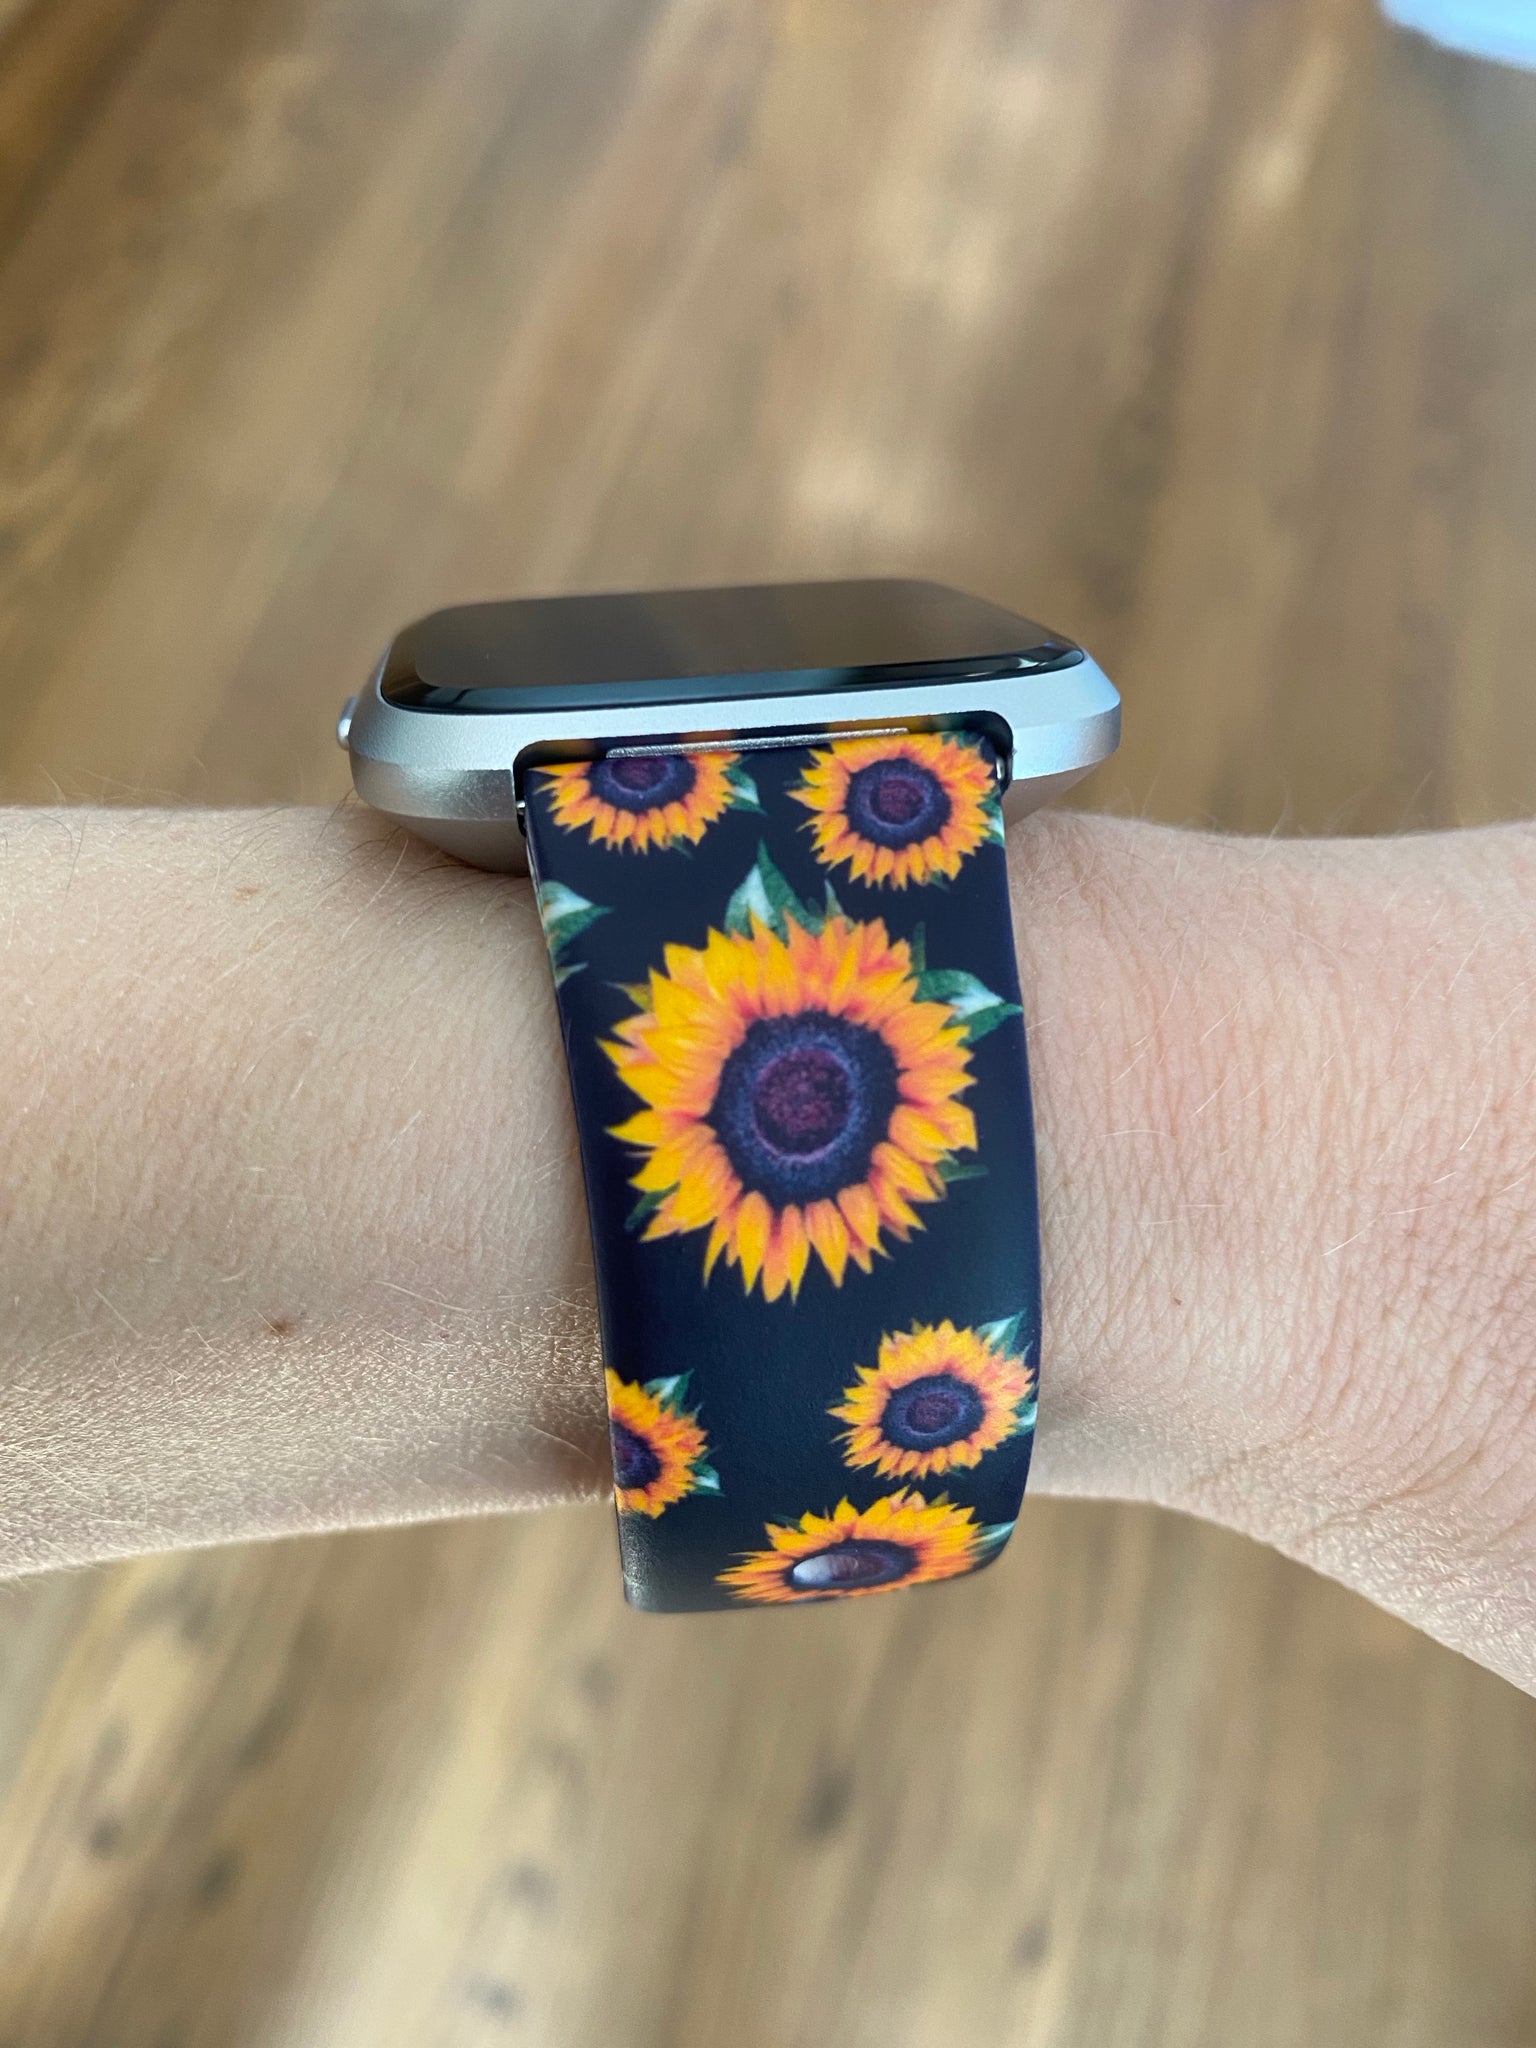 Black Sunflowers Silicone Band for Fitbit Versa